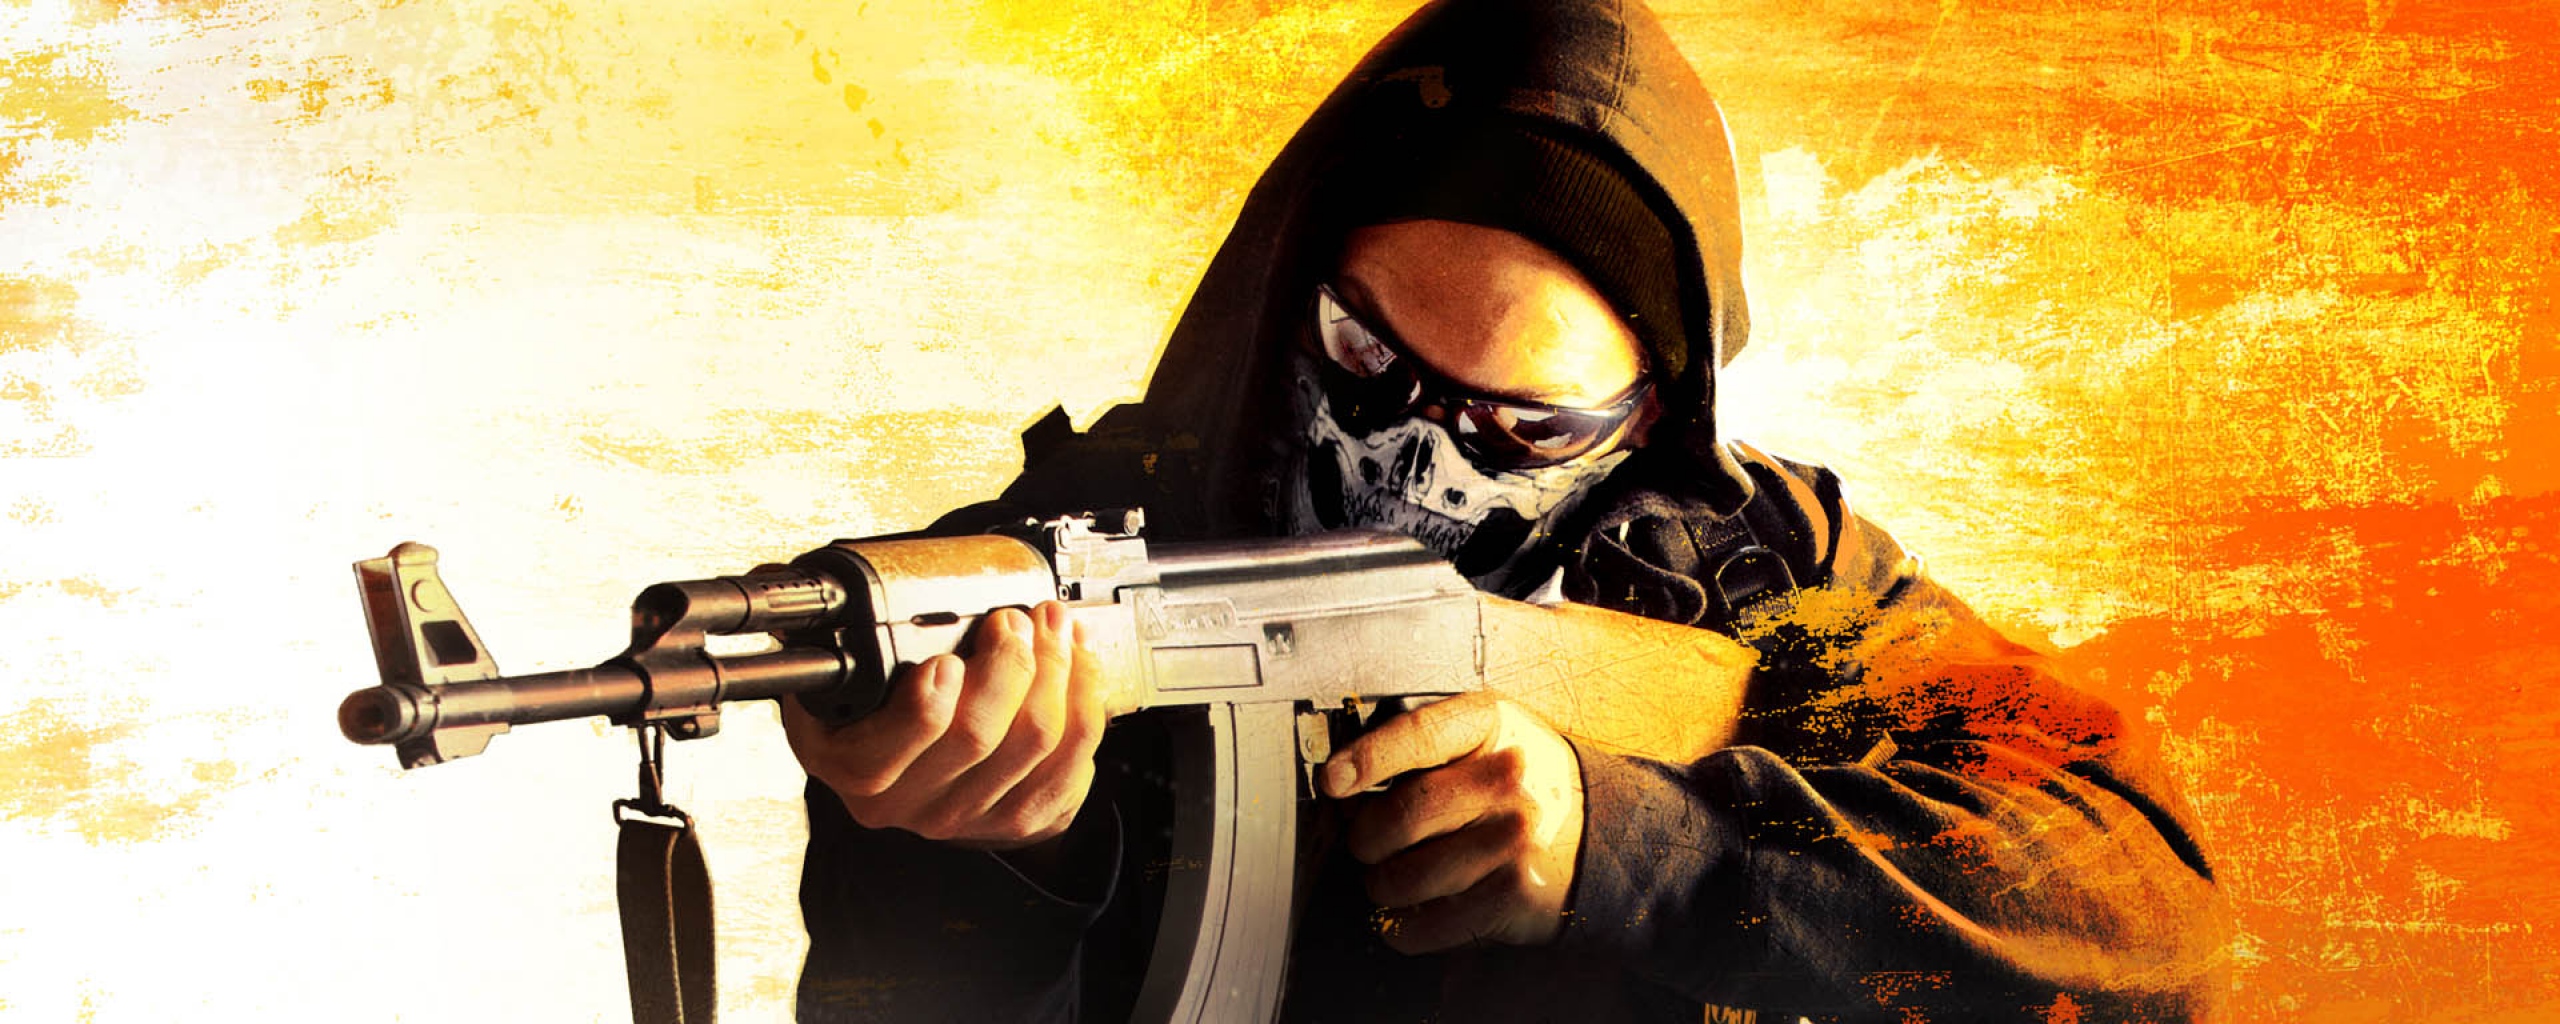 Counter Strike Global Offensive Art Anarchist Game